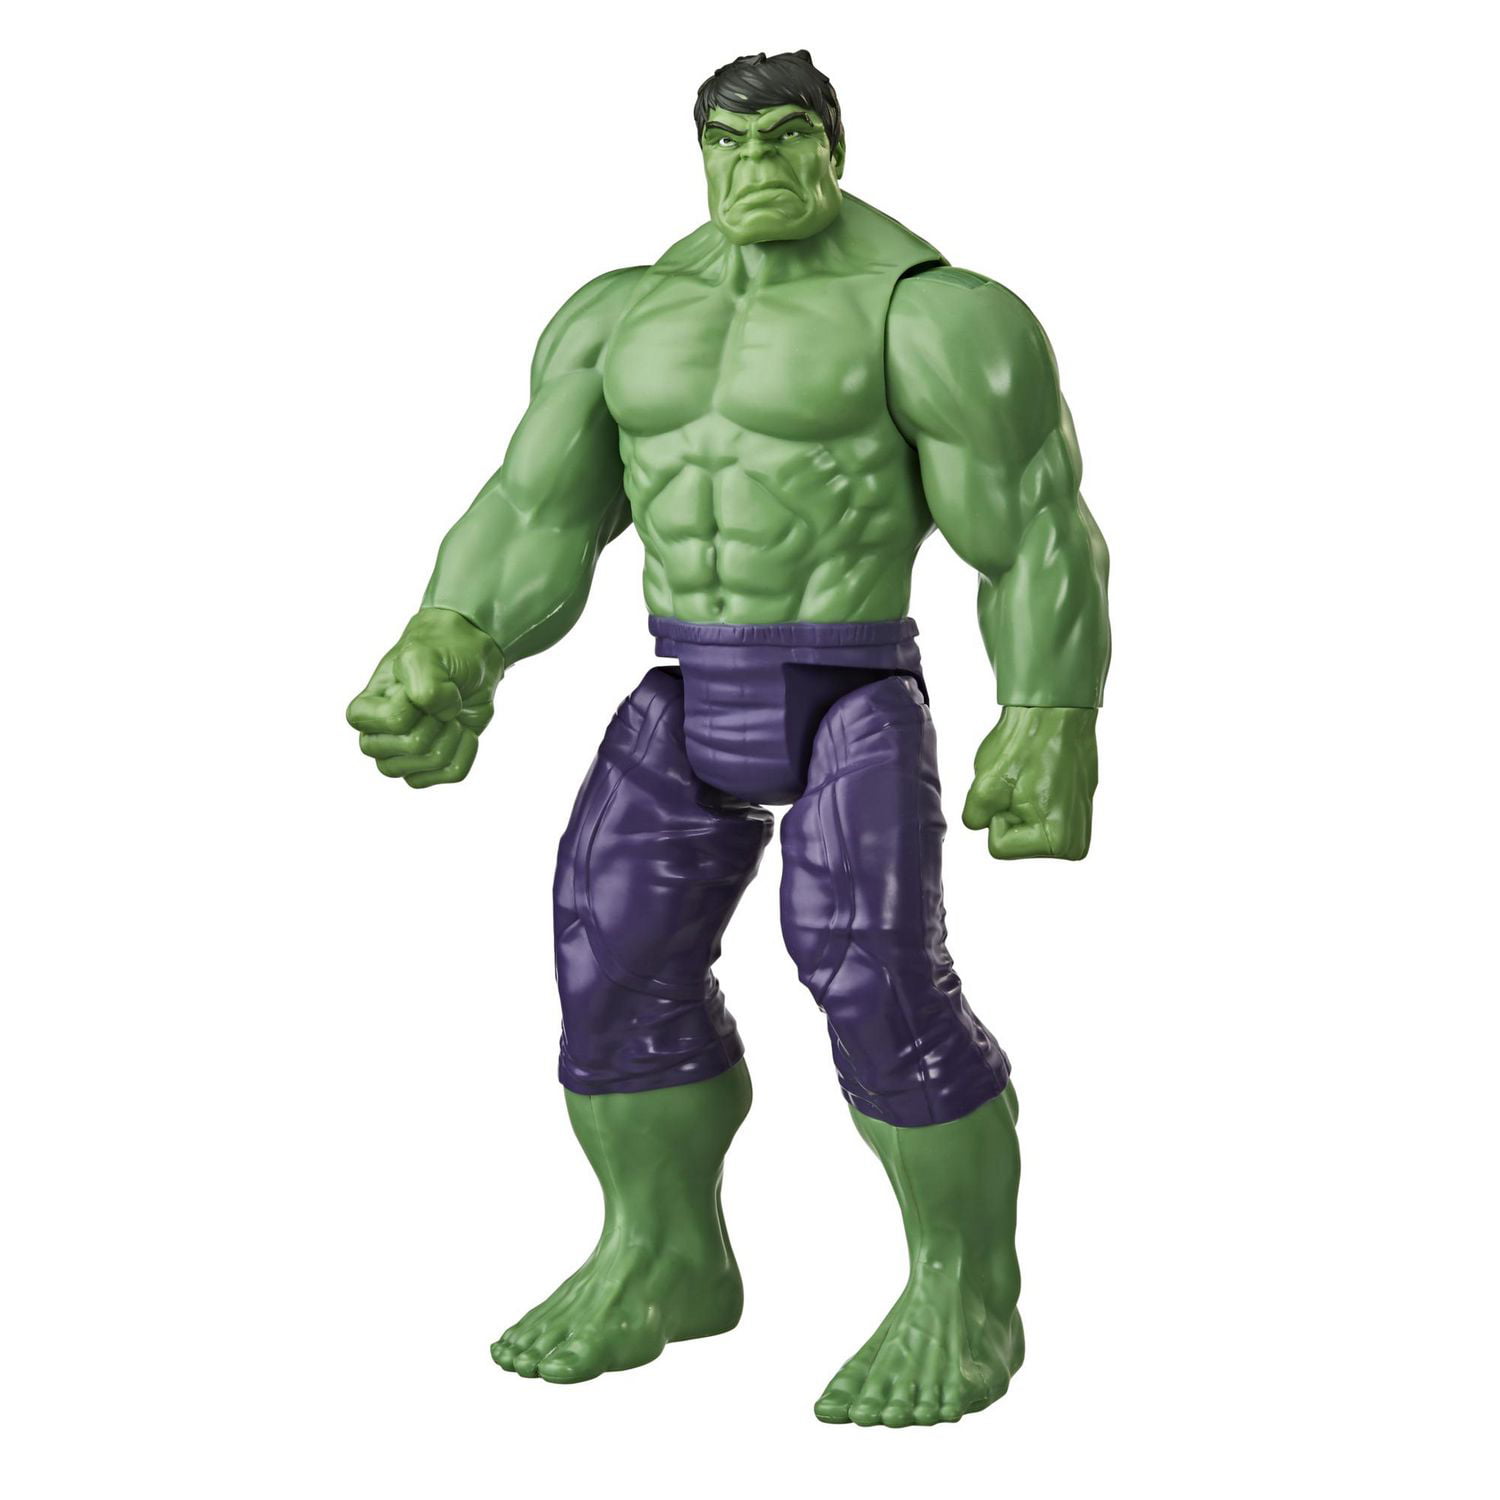 Marvel Avengers Titan Hero Series Blast Gear Deluxe Hulk Action Figure,  12-Inch Toy, Inspired By Marvel Comics, For Kids Ages 4 And Up, Ages 4 and  up 